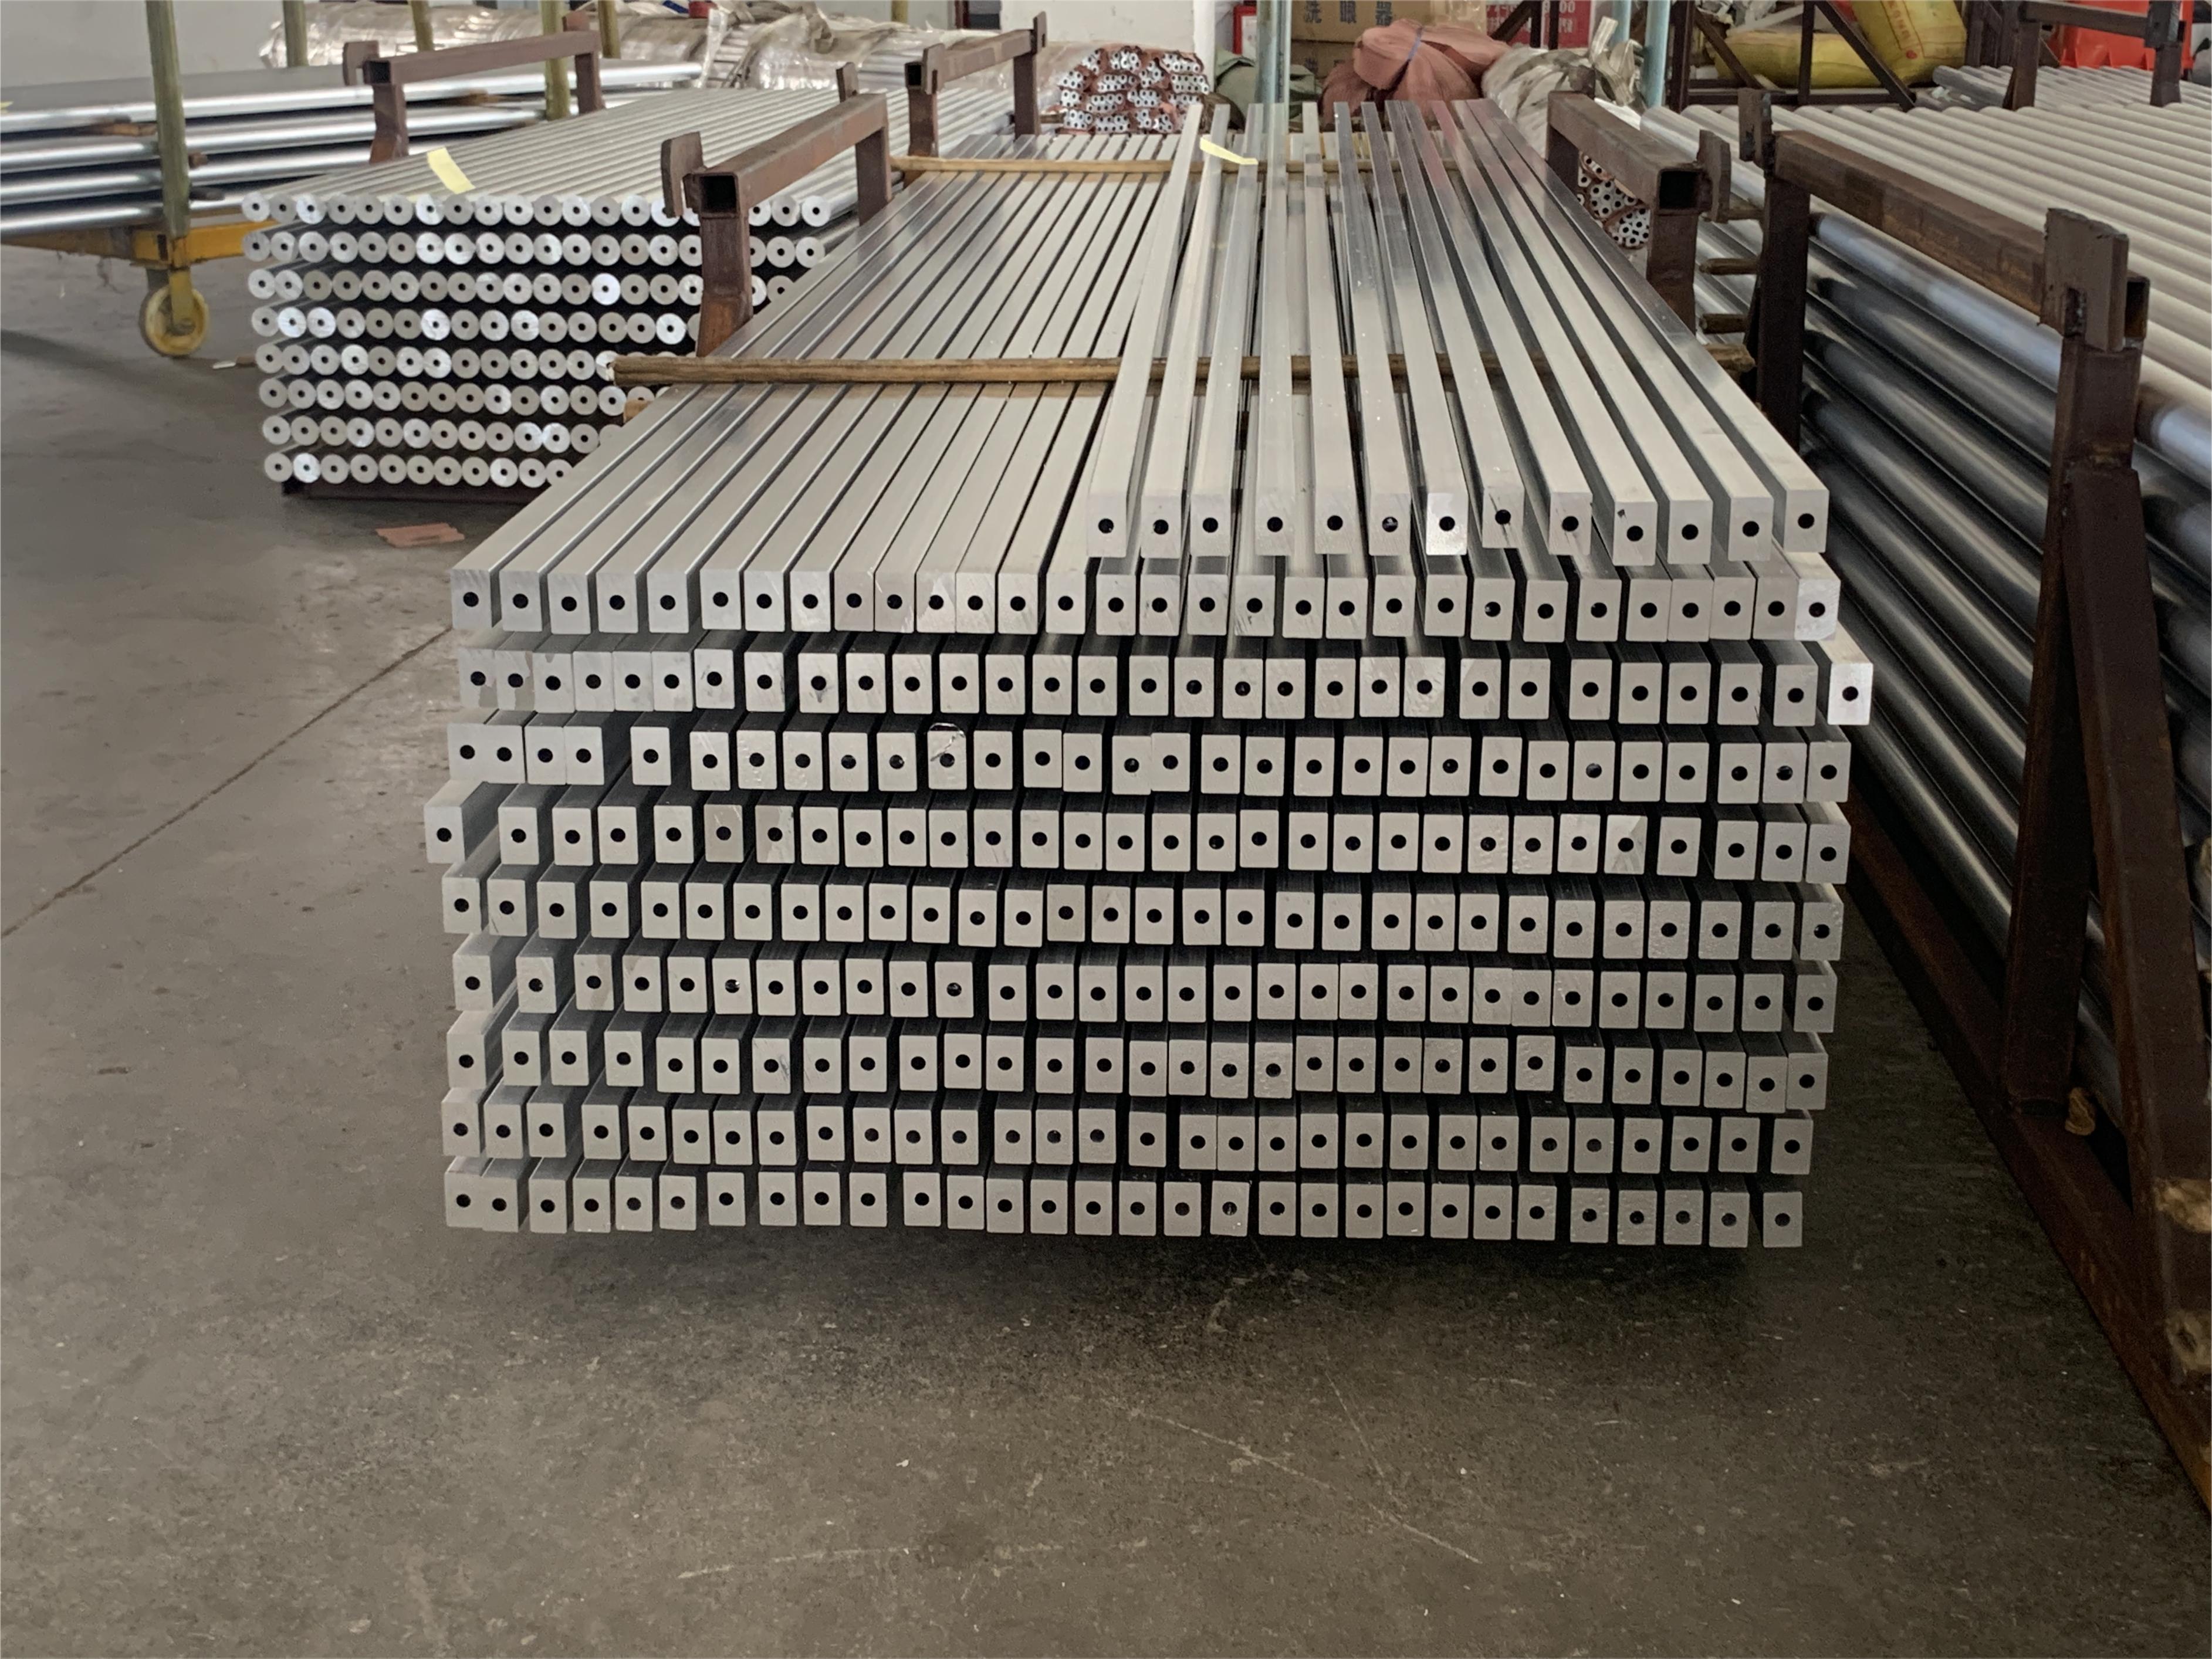 Application of aluminum rods in the pneumatic industry